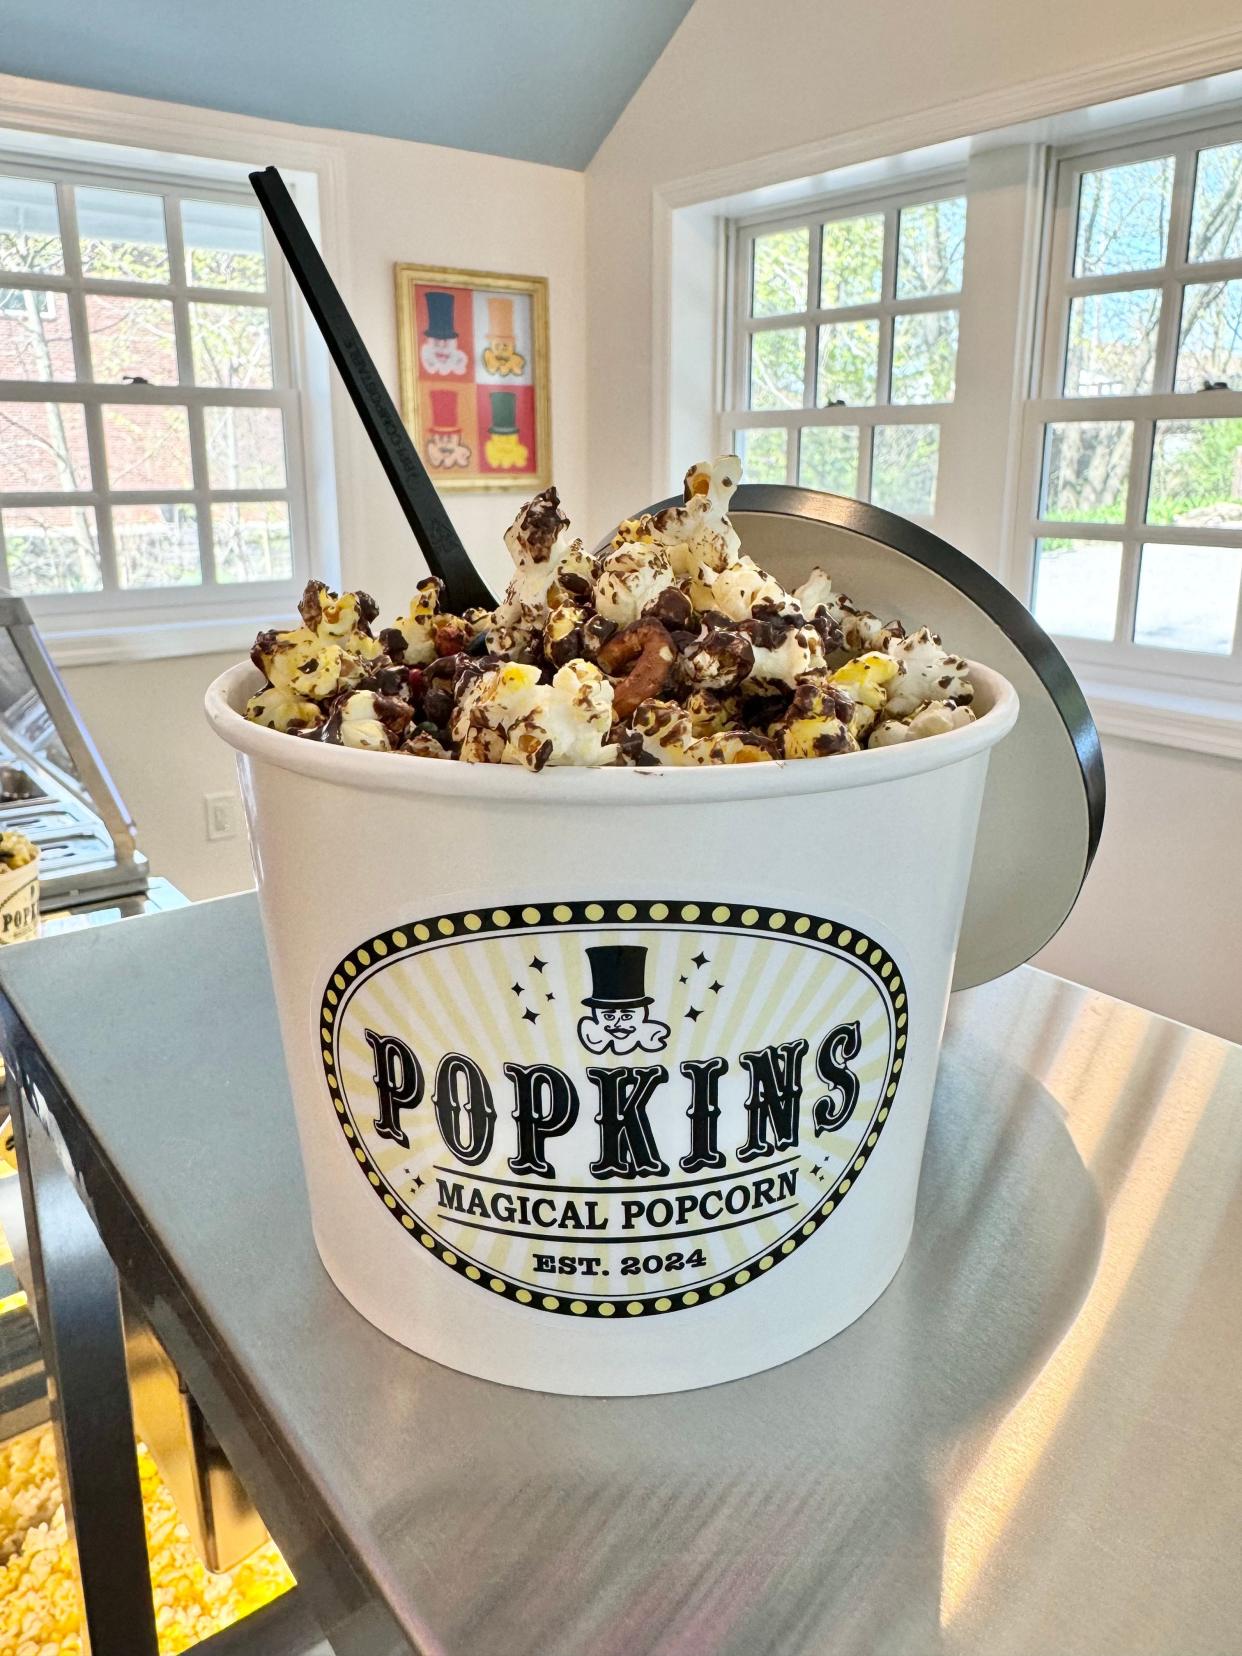 Deliciousness awaits at Popkins Magical Popcorn in Harmony borough.